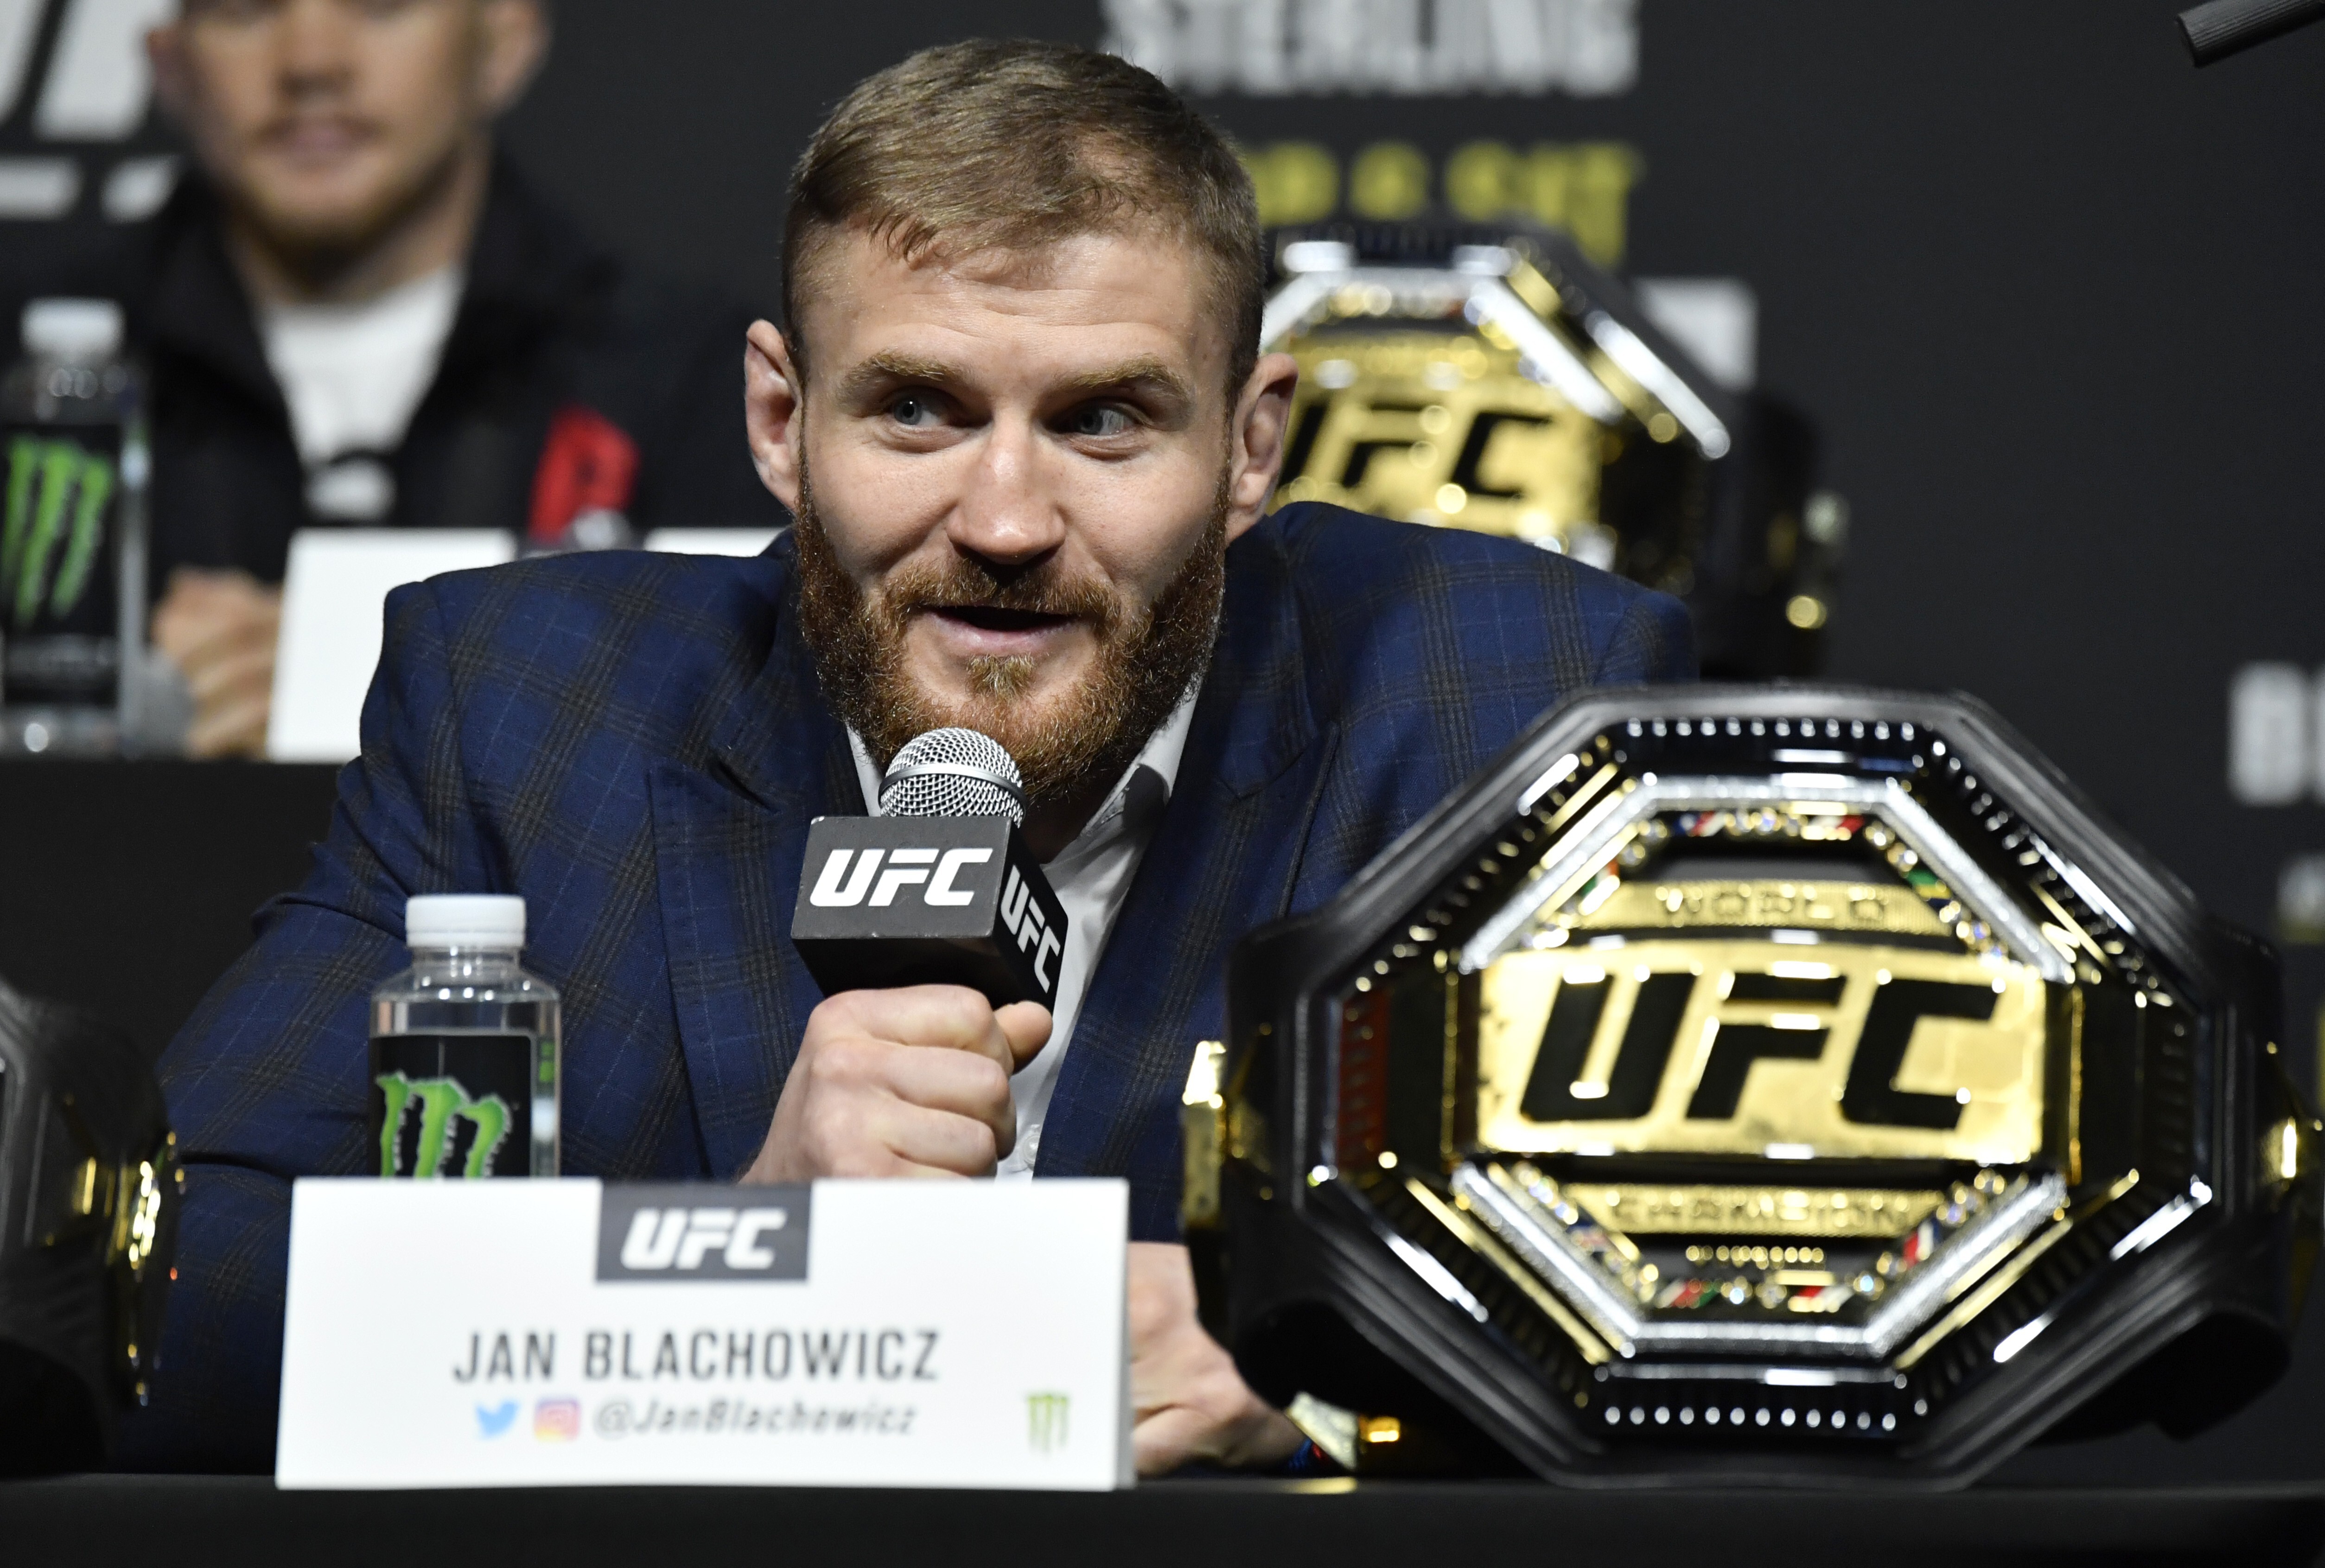 Jan Blachowicz interacts with media during the UFC 259 press conference at UFC Apex on March 4, 2021 in Las Vegas, Nevada. Photo: Jeff Bottari/Zuffa LLC